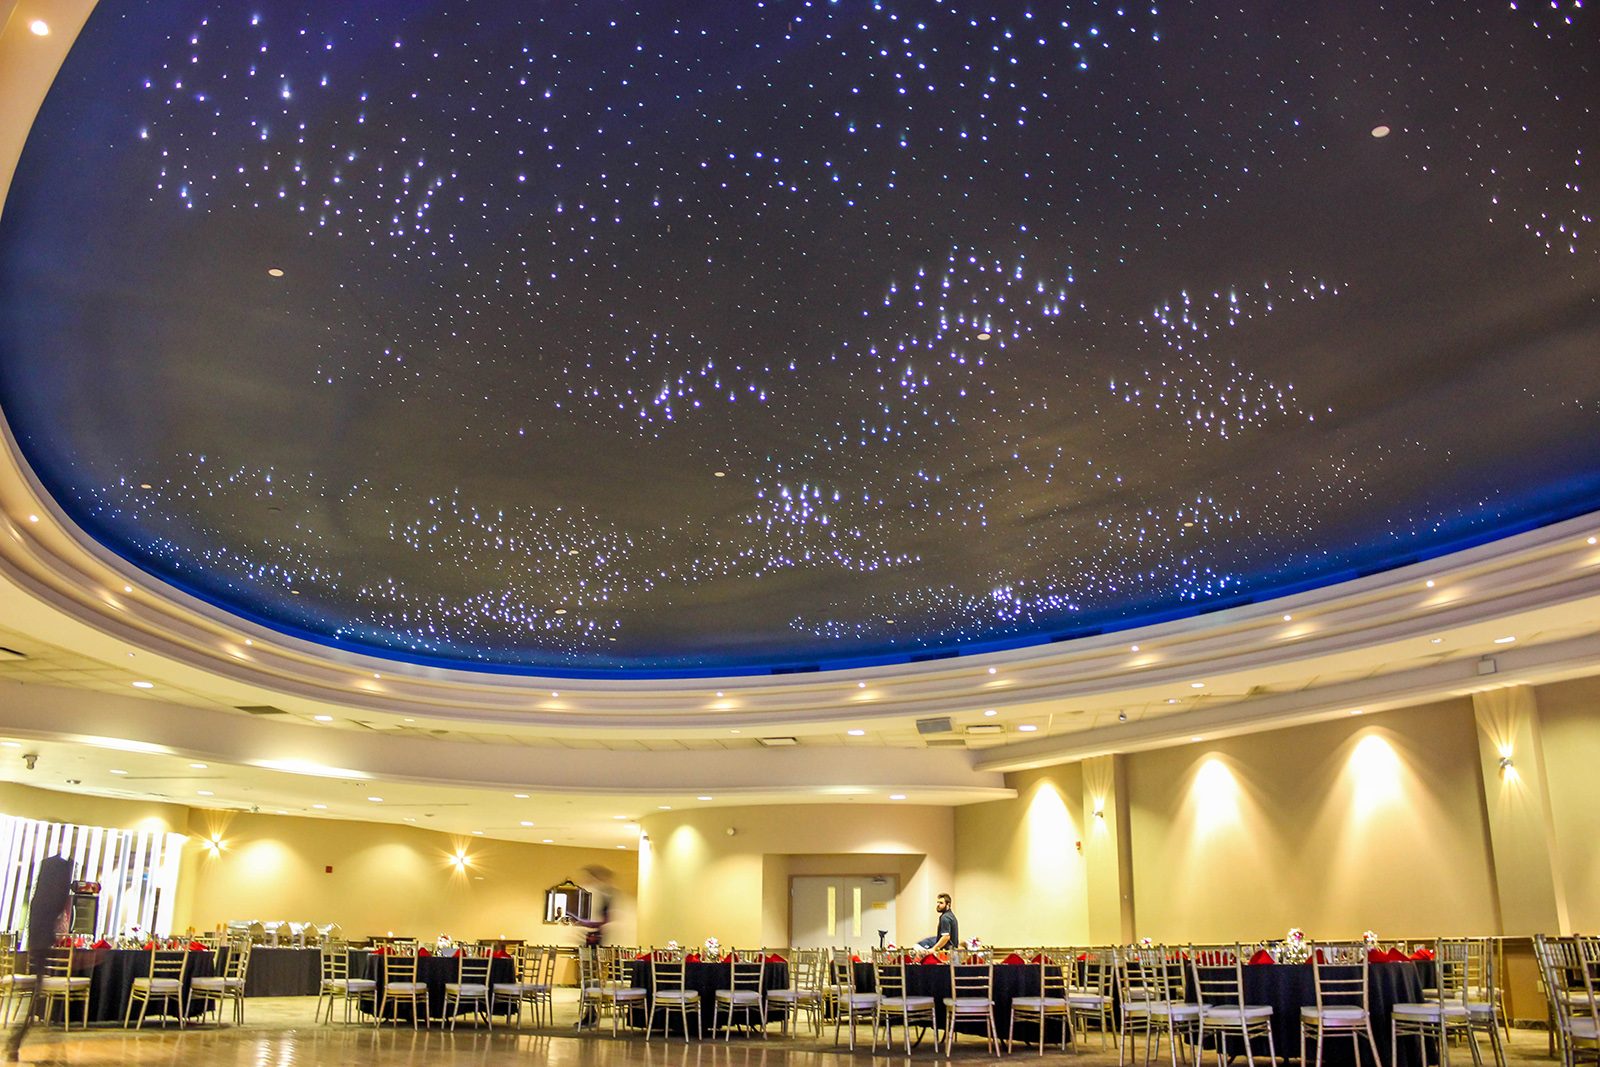 The perimeter of a large banquet room is filled with nearly a dozen round tables draped in cloth and surrounded by chairs. Two thirds of the photo is taken up by the ceiling, which resembles clusters of stars in the night sky. At the back of the room near a door, a person sets one of the banquet tables.